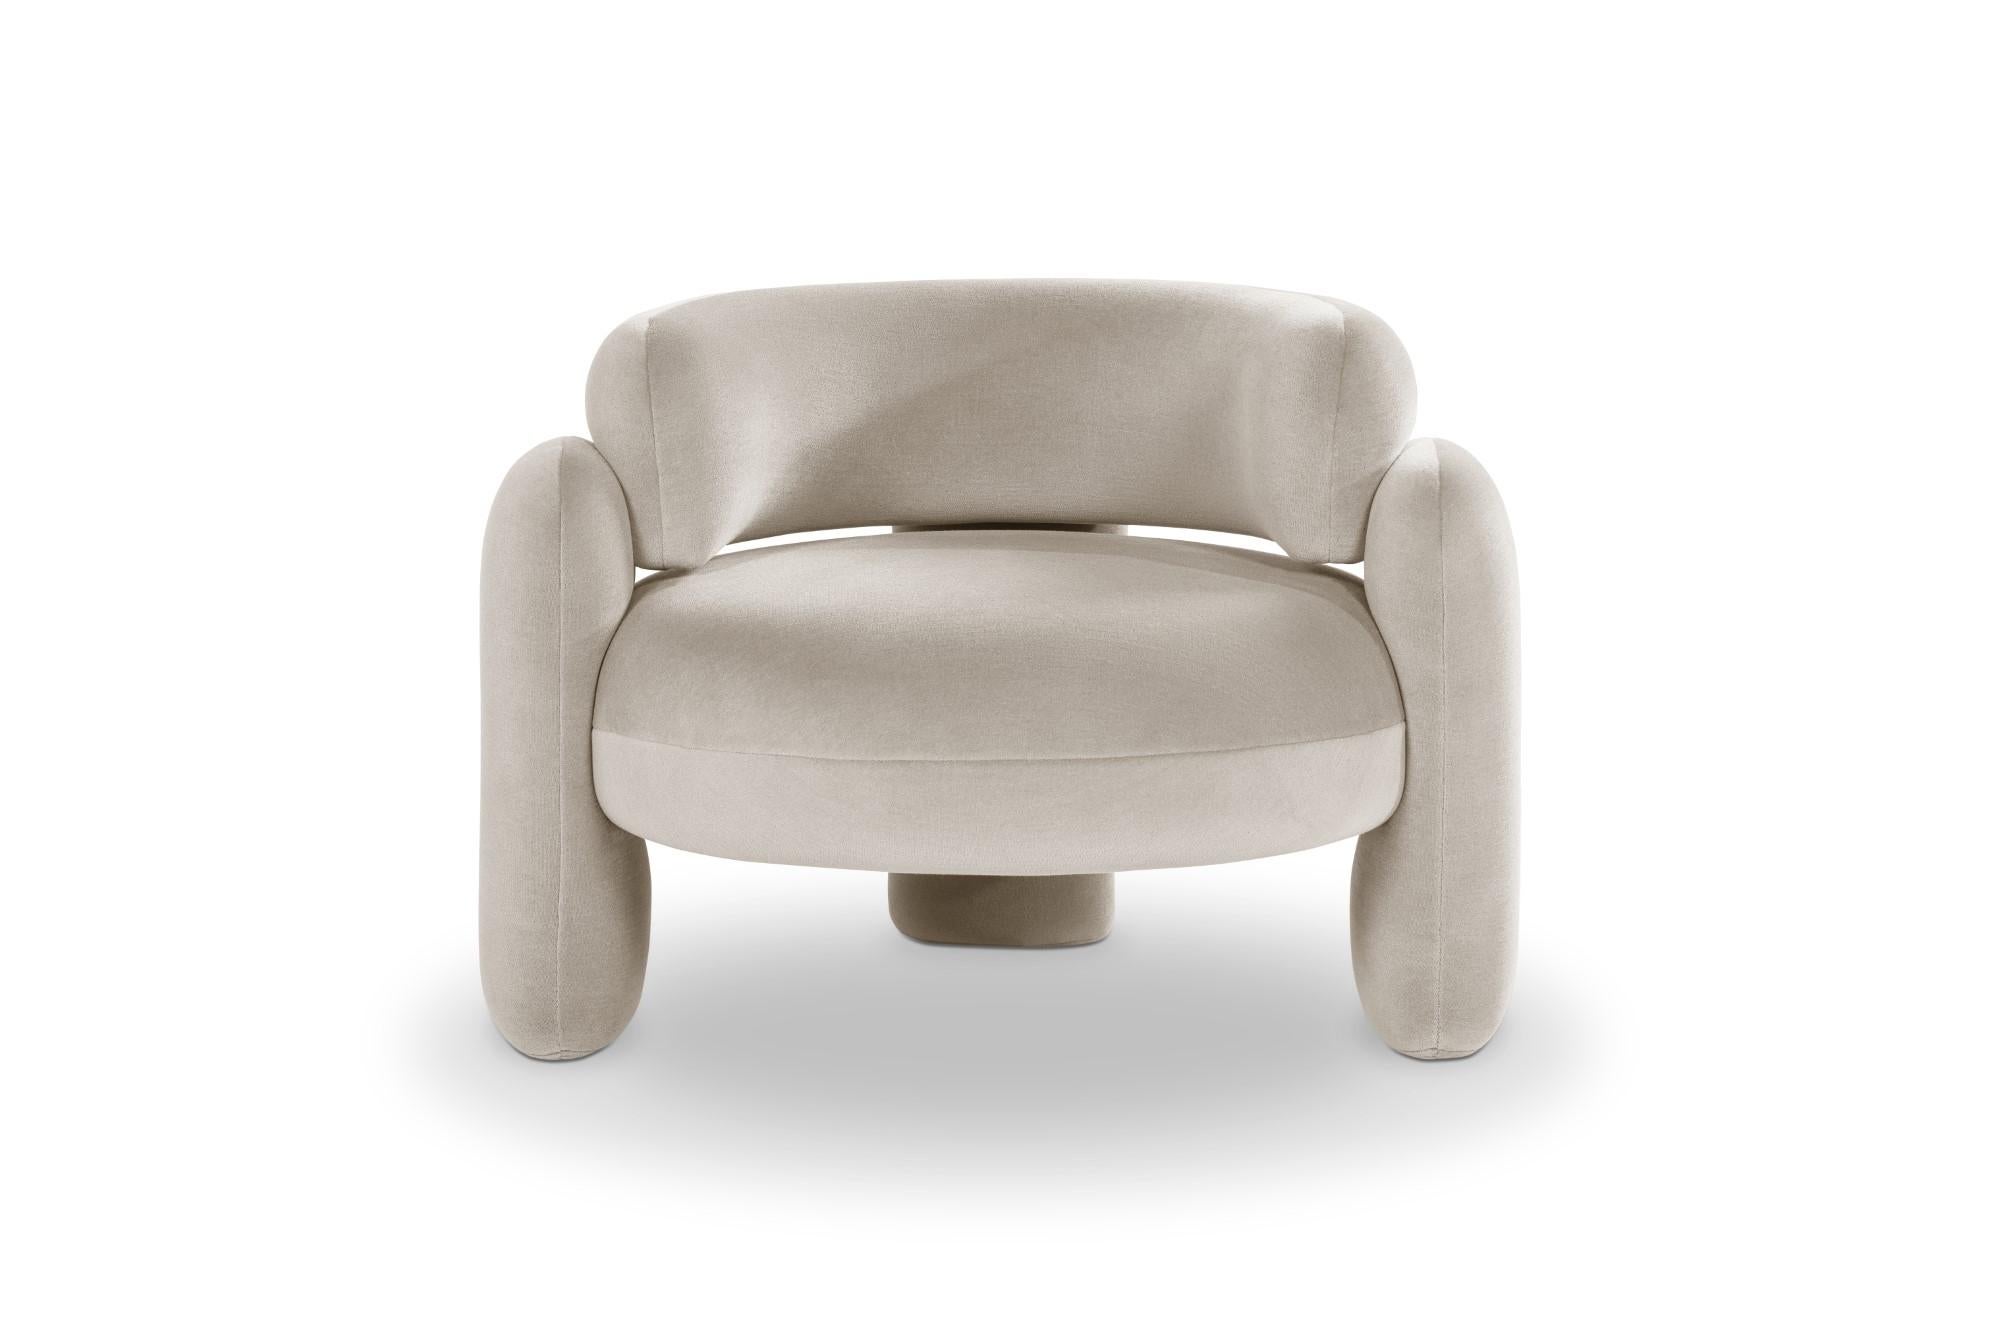 Embrace armchair by Royal Stranger
Dimensions: W 96 x D 85 x H 68 cm.
Different upholstery colors and finishes are available. Please contact us.
Materials: Velvet.

Featuring an enfolding composition of geometrical shapes, the Embrace Armchair will